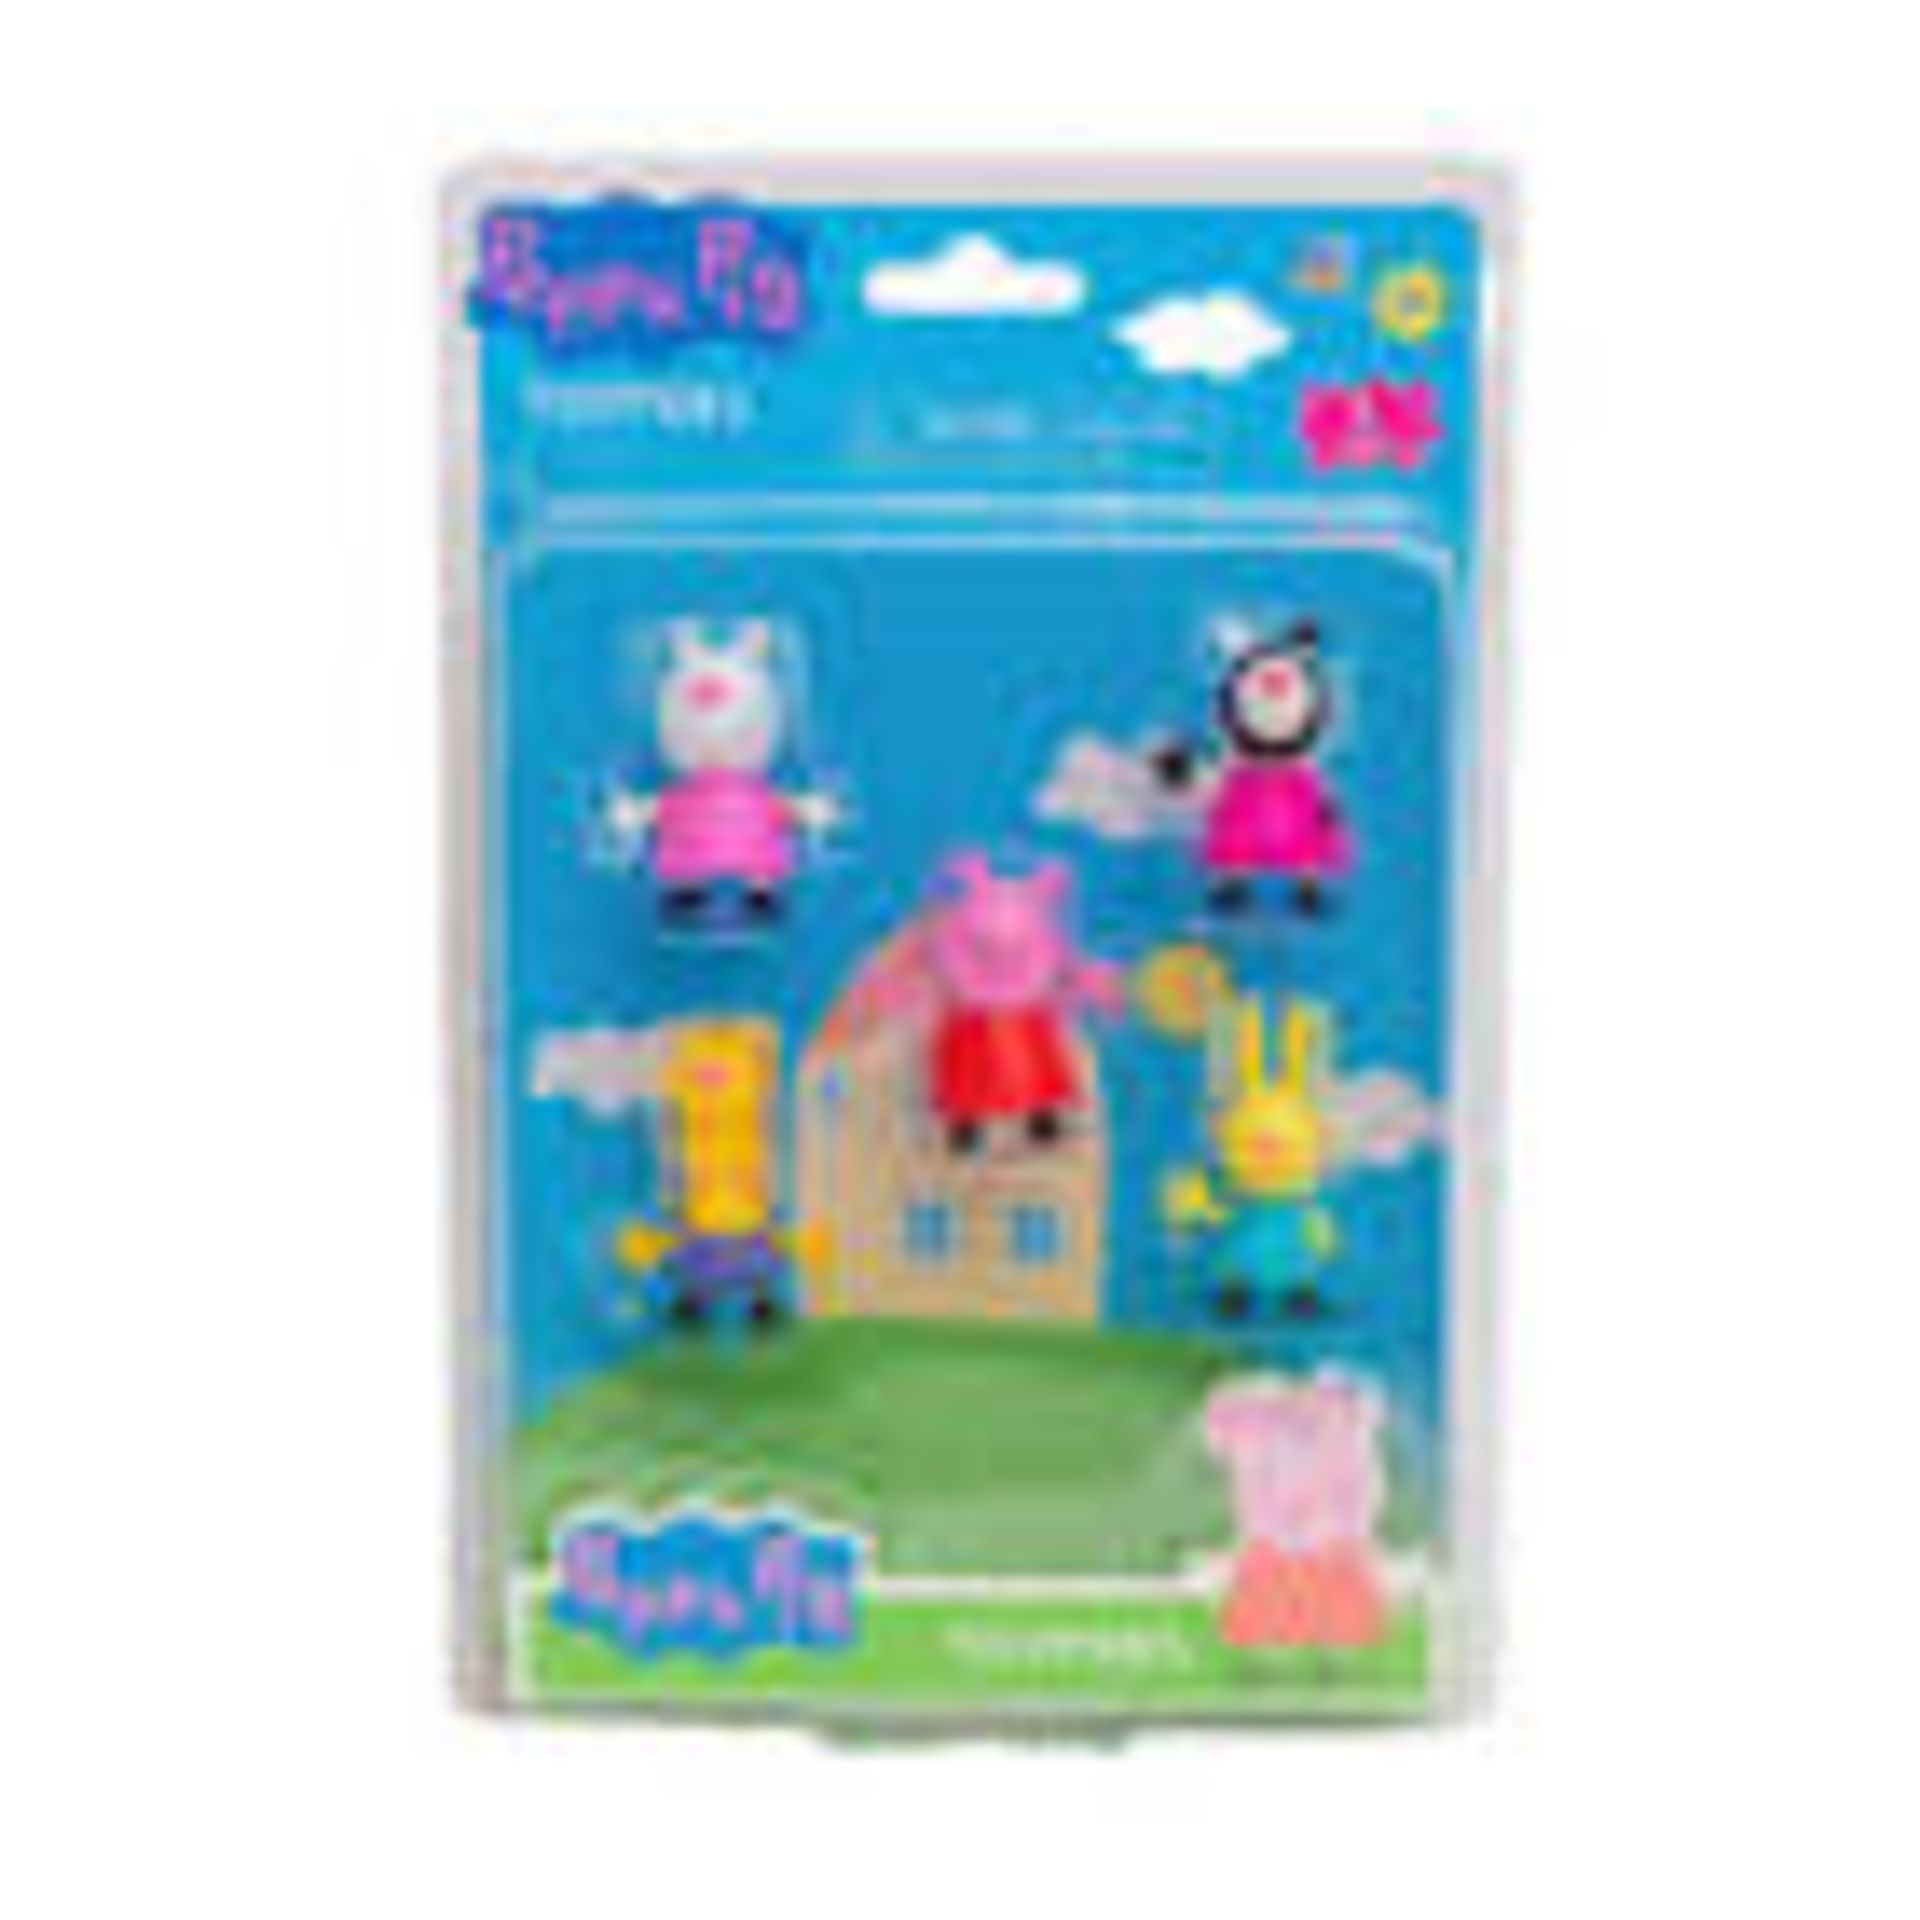 100 x Peppa Pig Toppers/Stamper Sets - Image 2 of 4